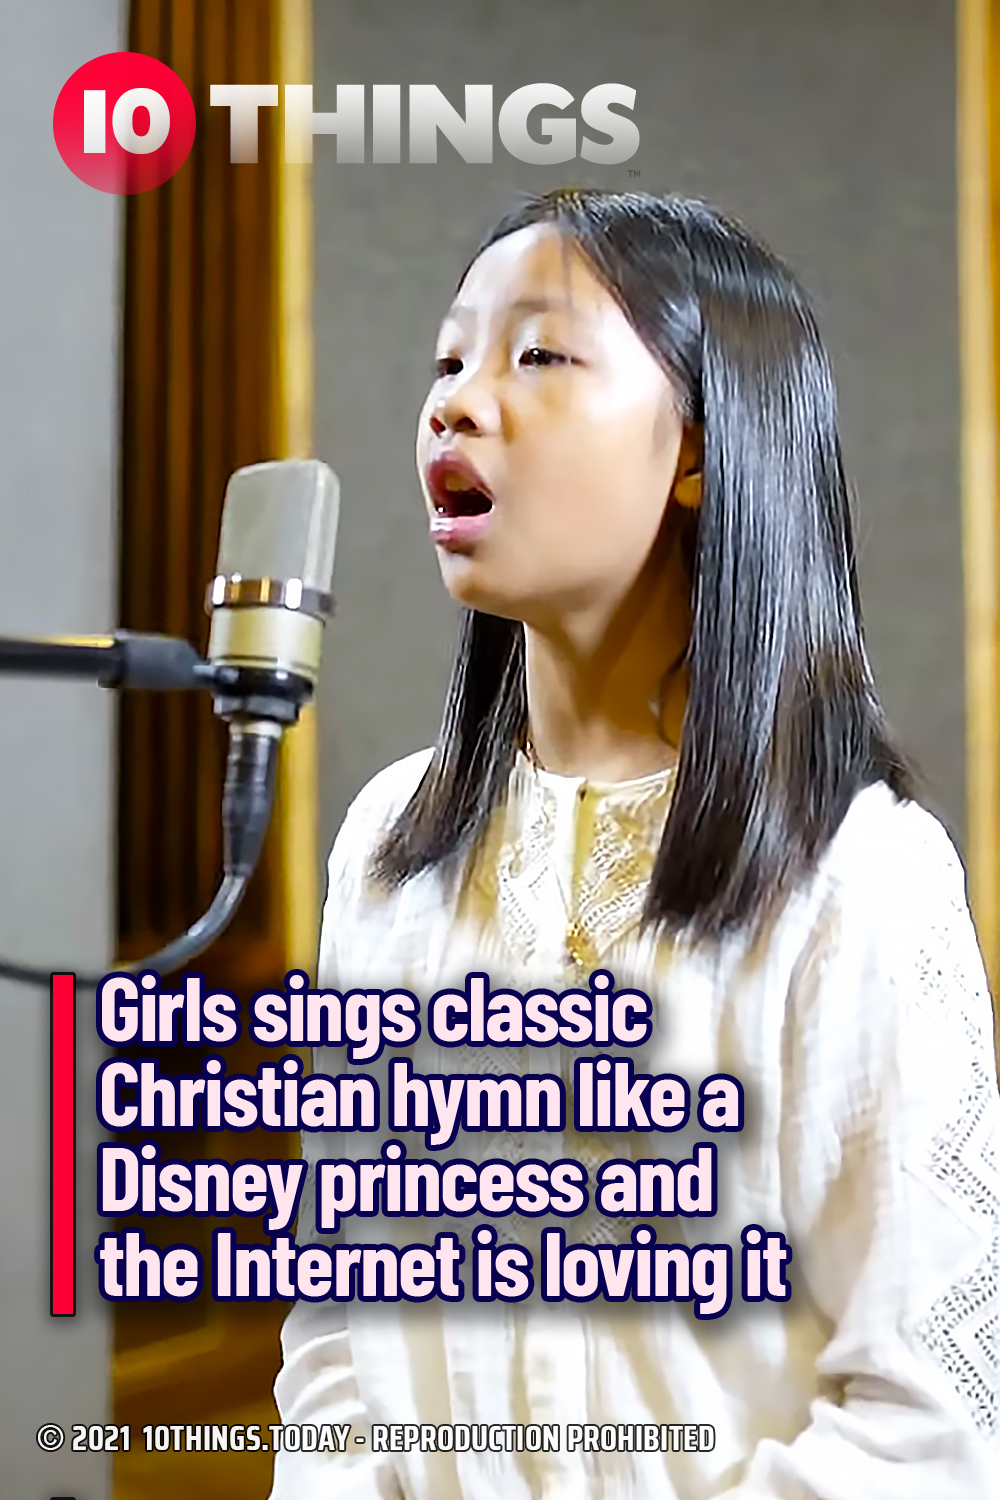 Girls sings classic Christian hymn like a Disney princess and the Internet is loving it